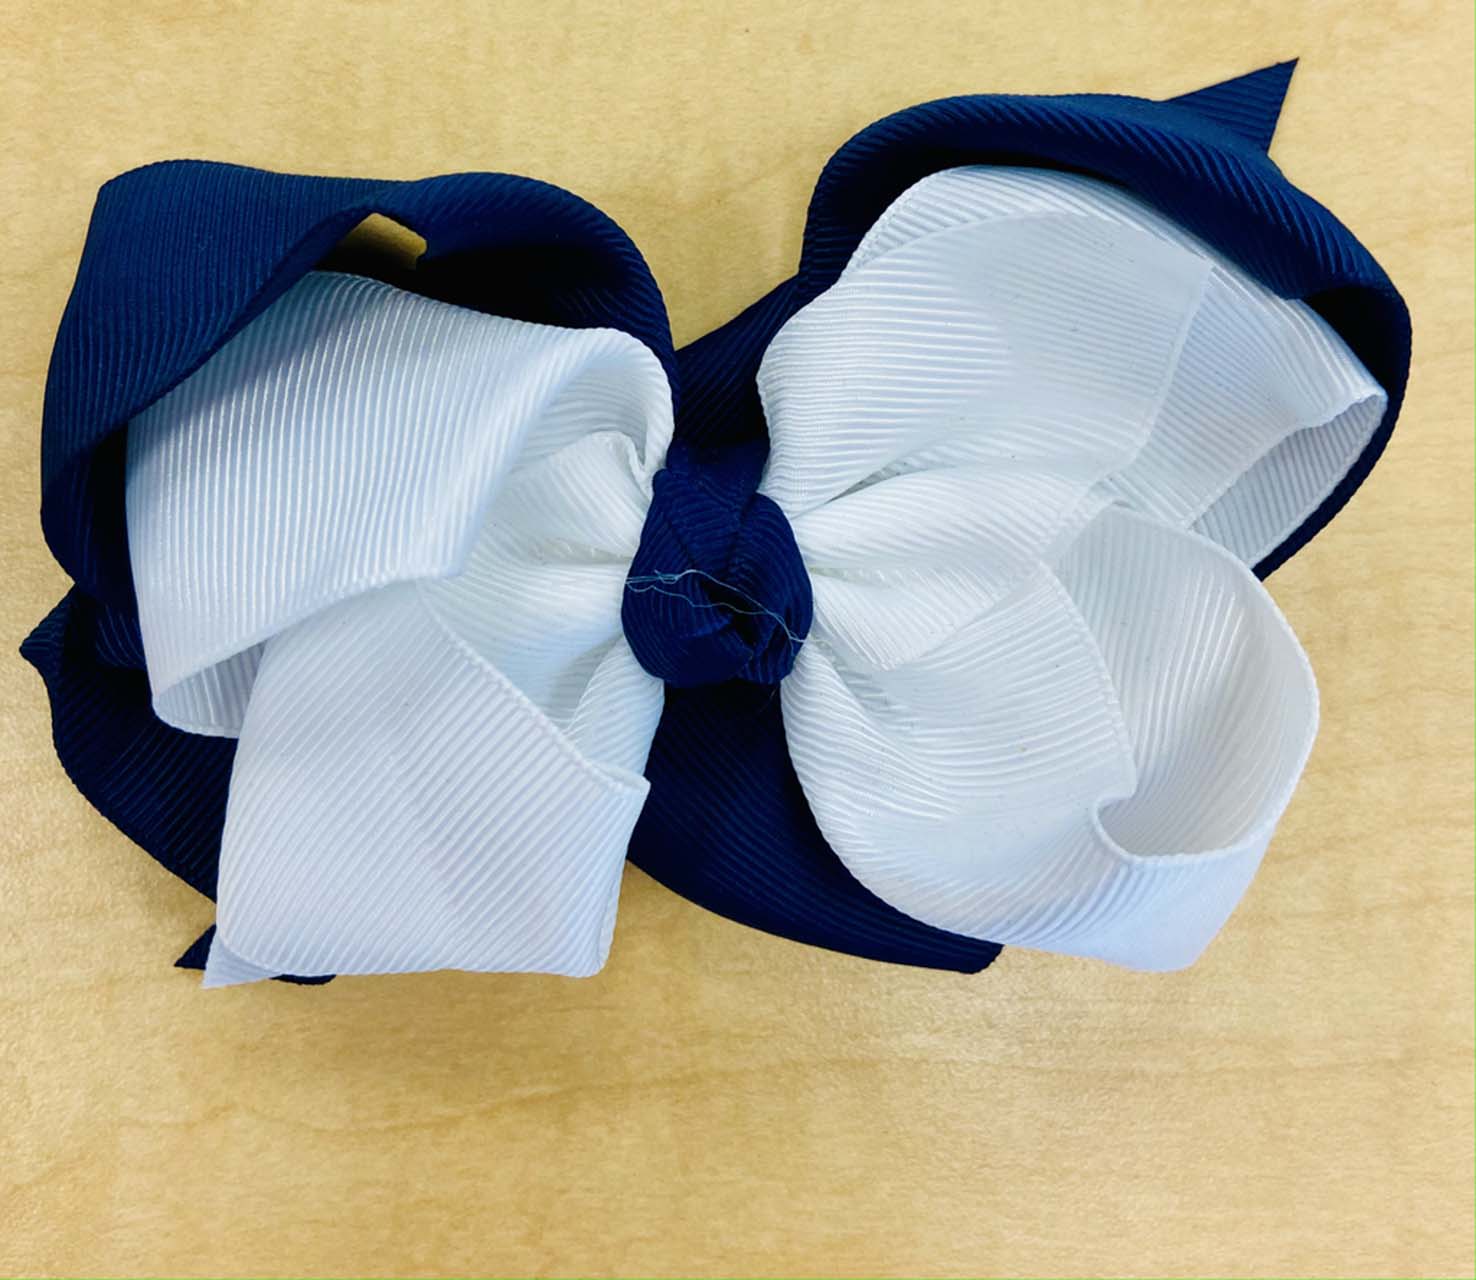 Double Ribbon Bow - Light Blue/ Navy with Bottle Cap